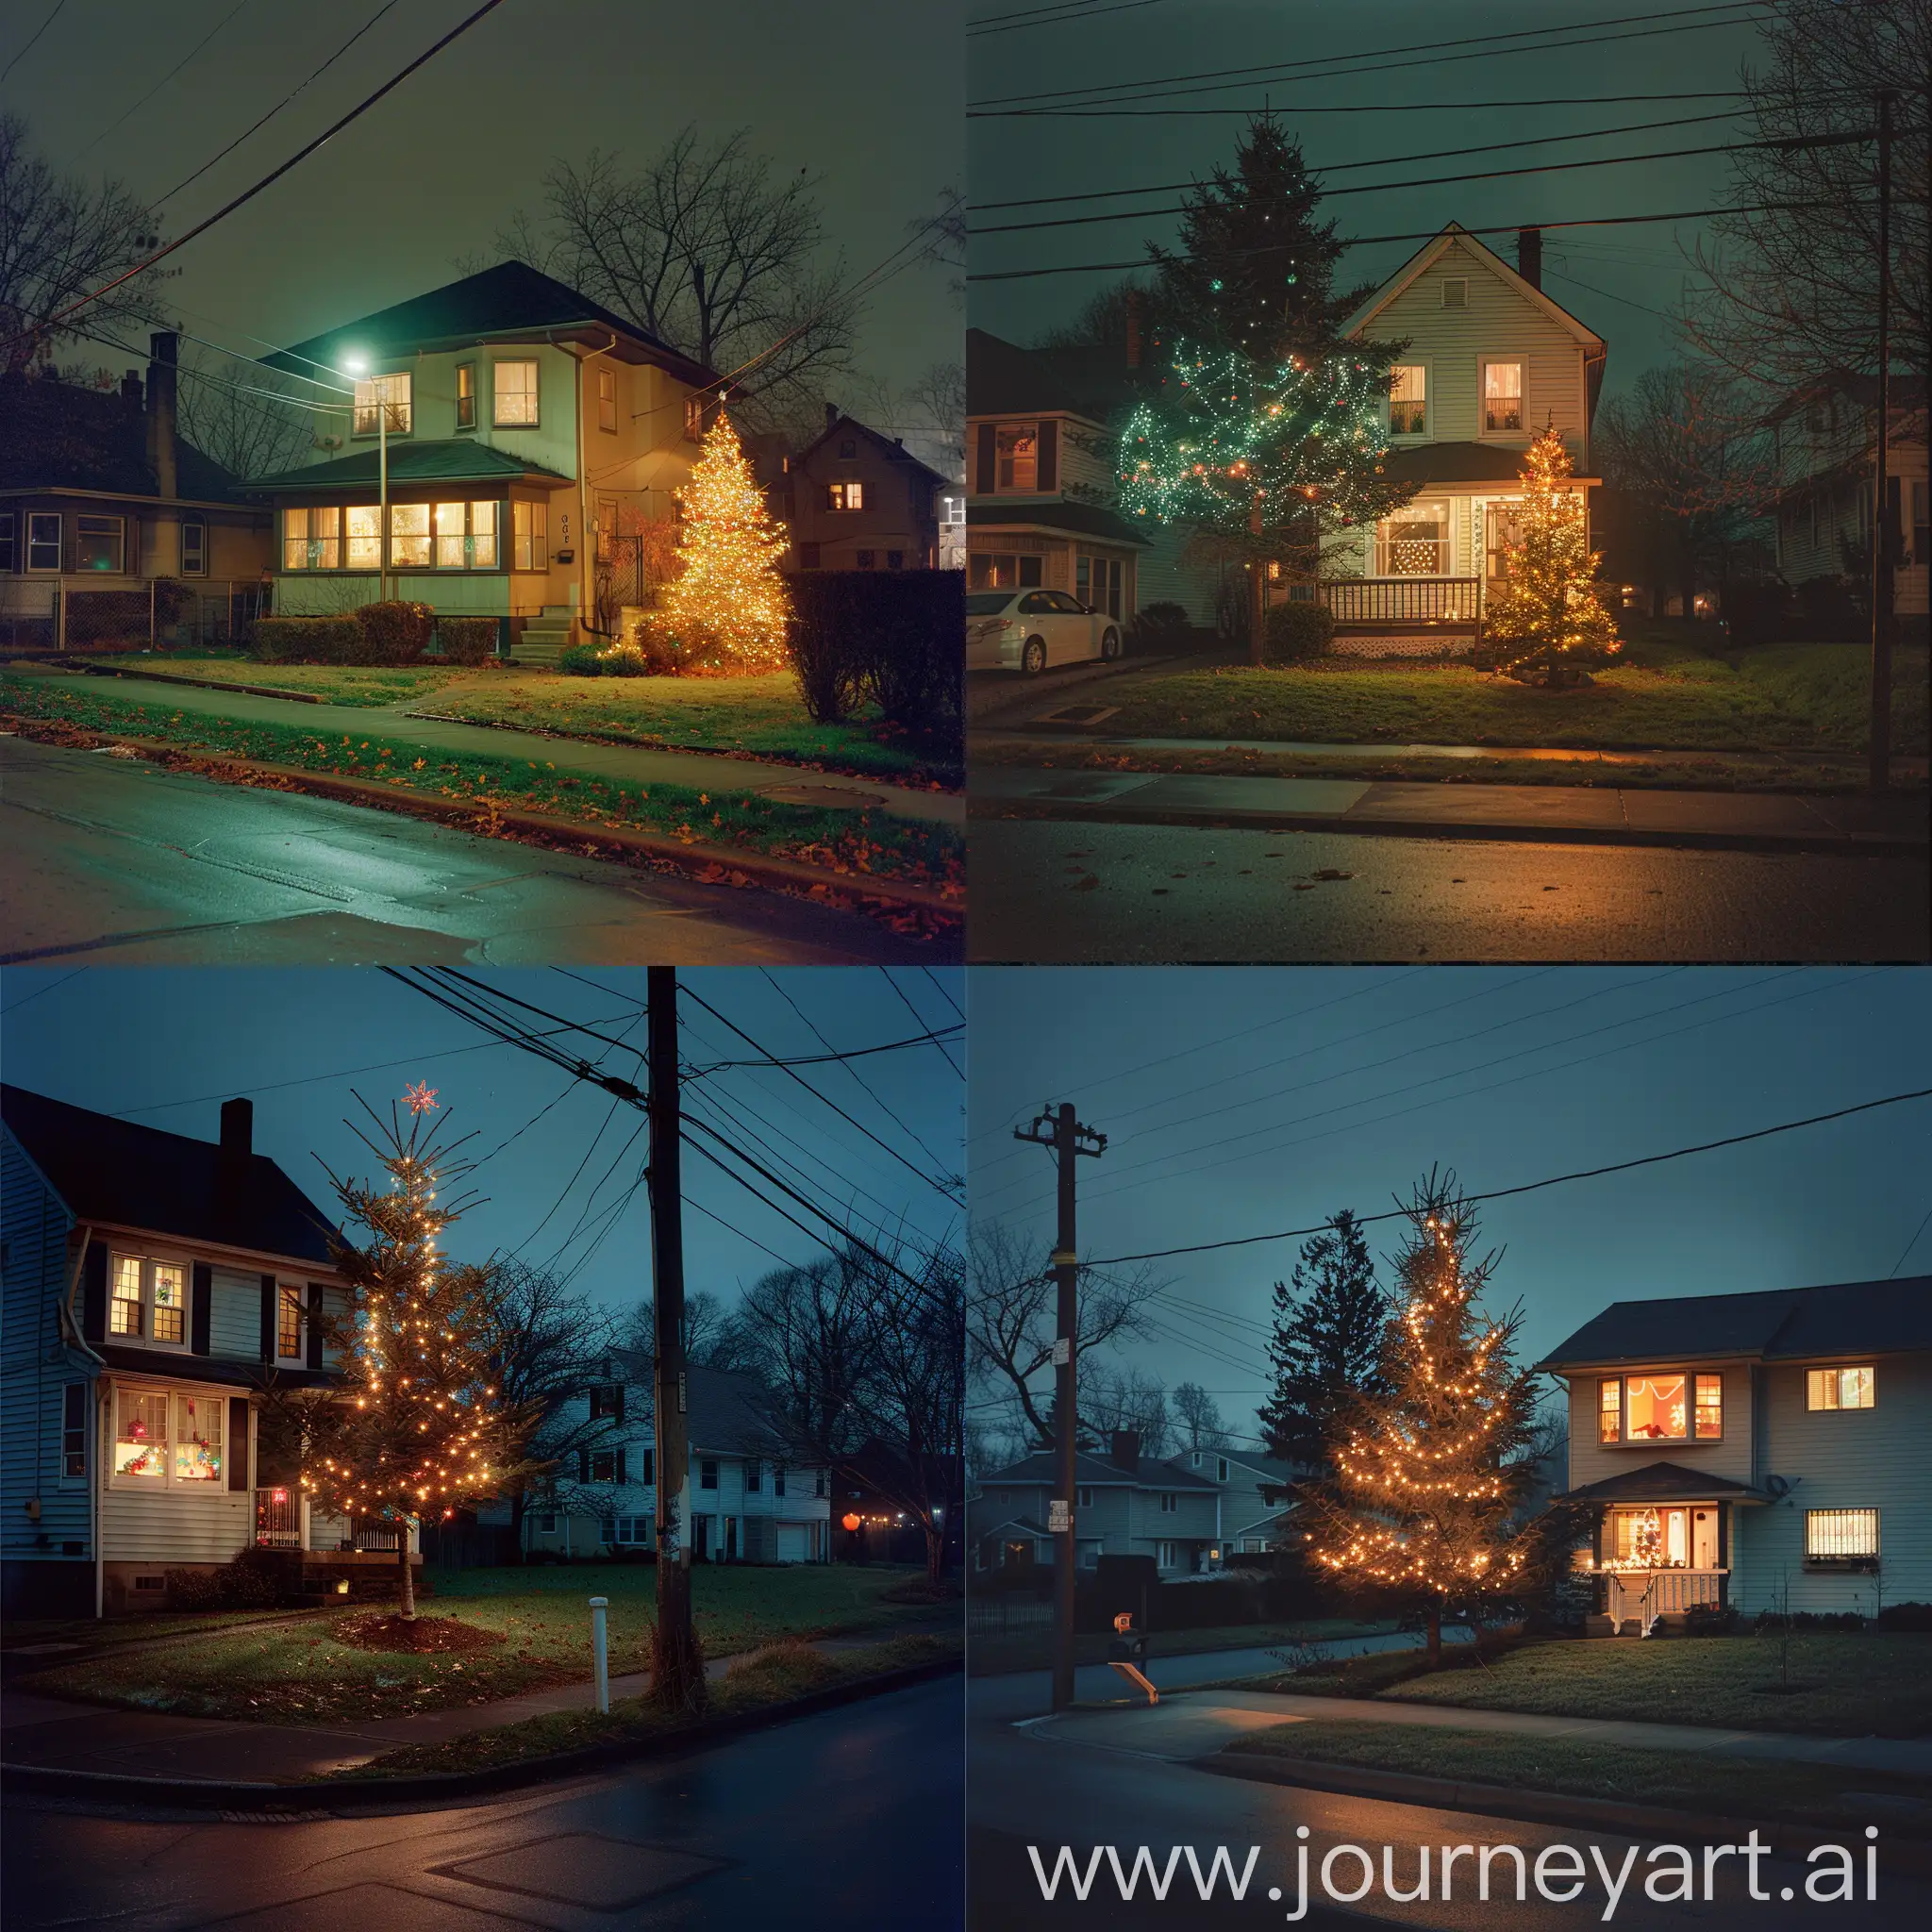 Depict a picture shot on a large format camera on color film similar to portra 800 of a house with indoor lights on, on a street corner in a residential neighbourhood with a tree with christmas light on the lawn at night inspired by todd hido images.